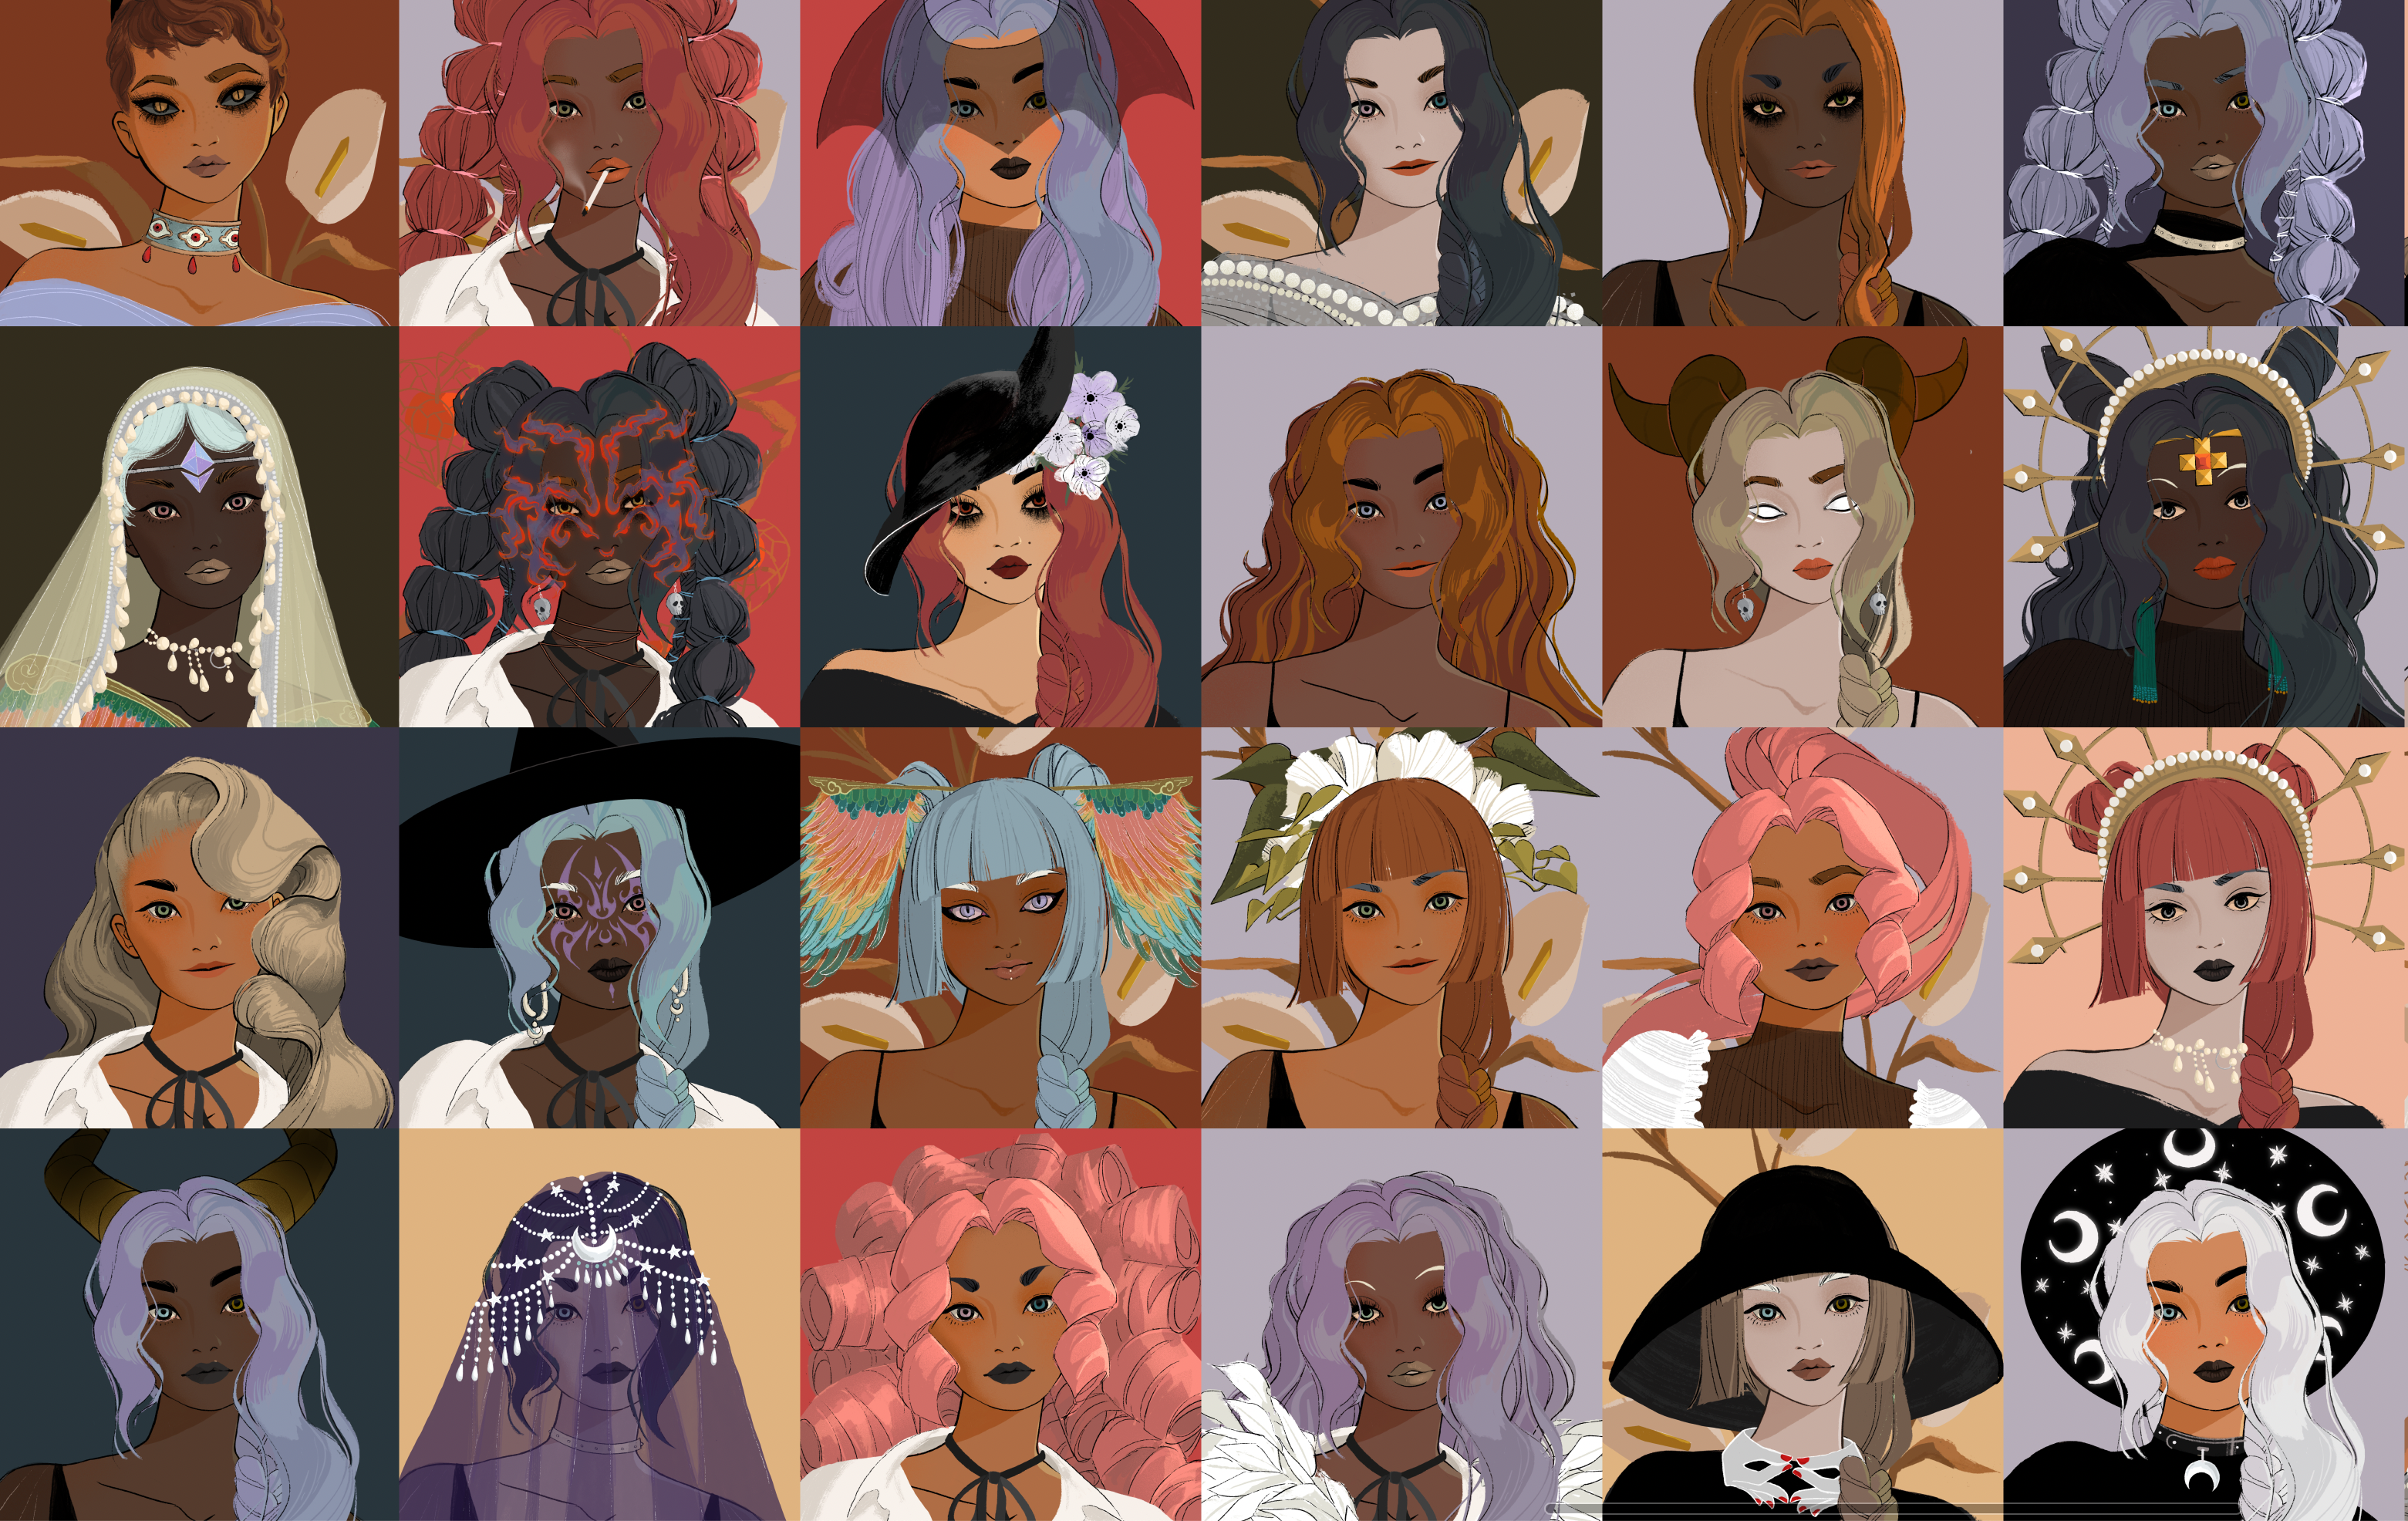 an uncurated set of witches generated during a test roll. Initially when curating it was hard to get rid of any of them, but we soon became ruthless in our preferences, looking for witches we'd want in our own wallets. 